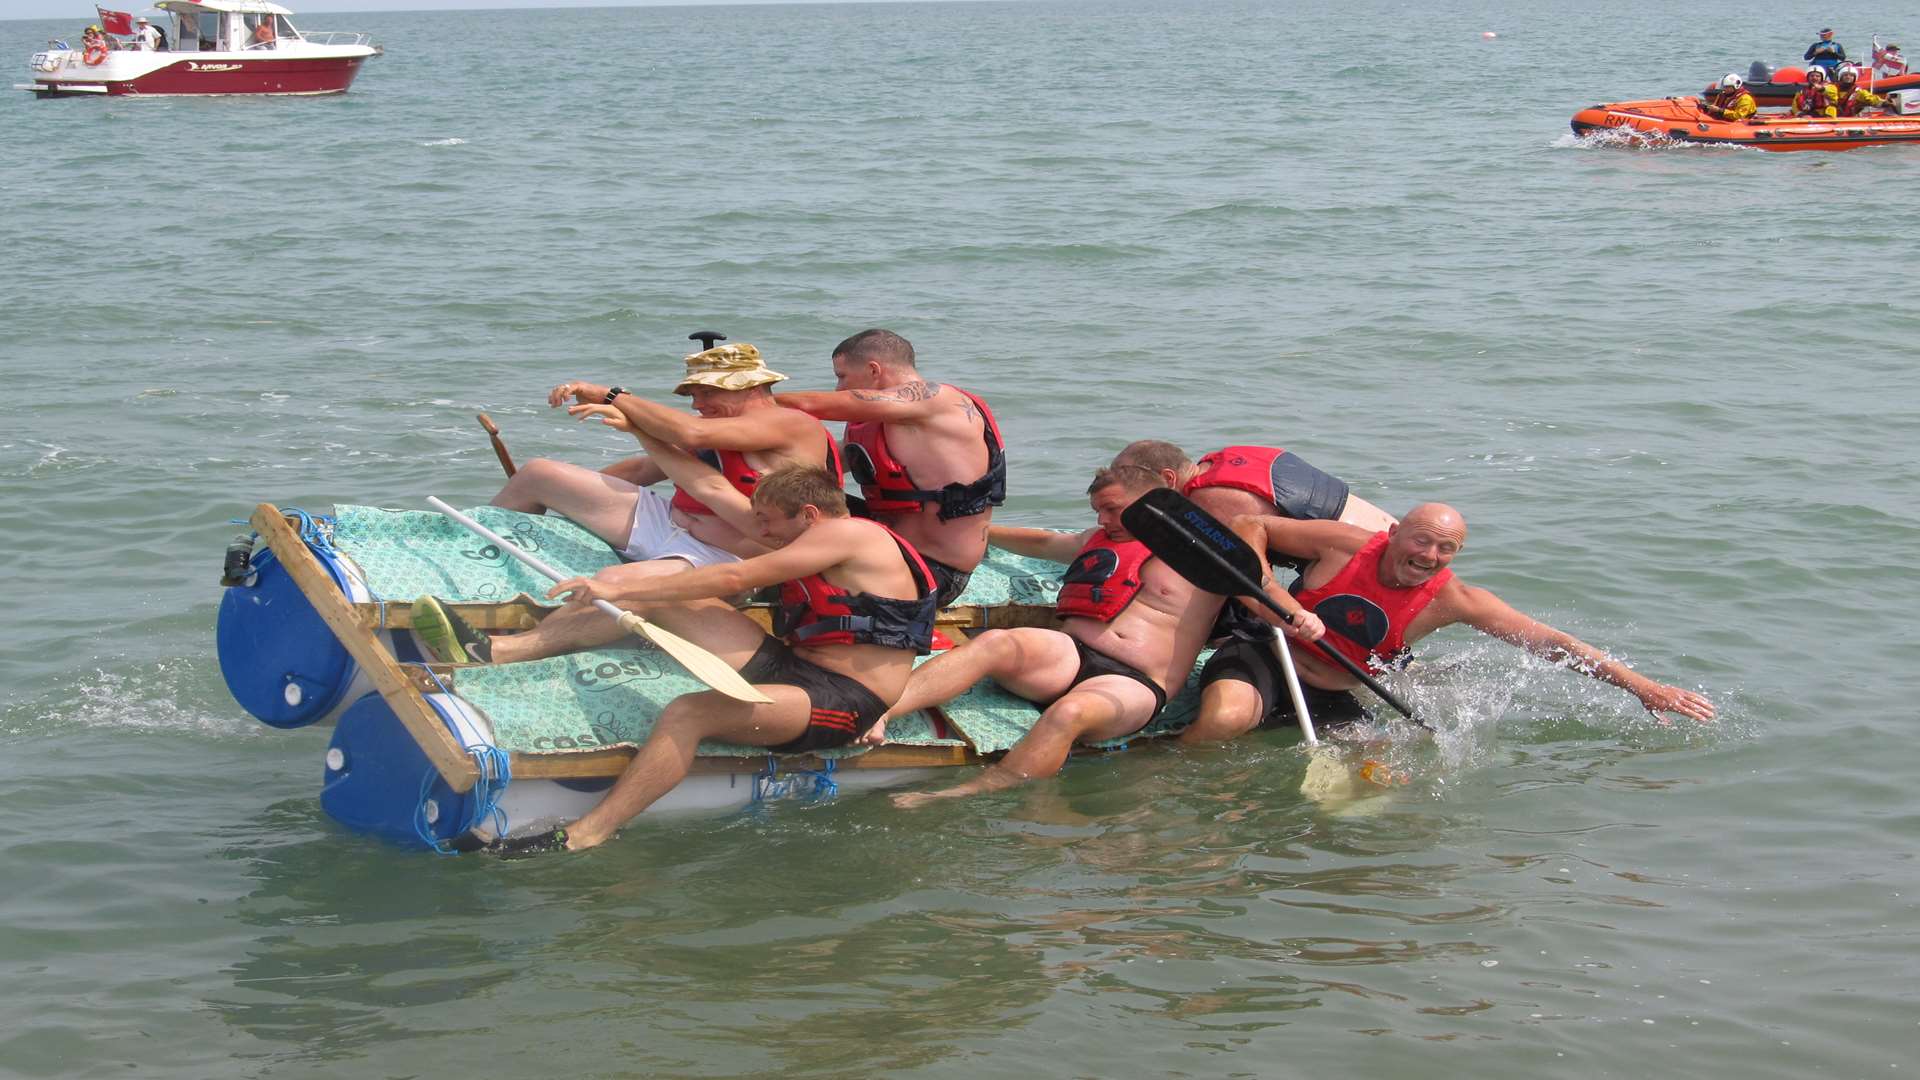 The Betteshanger Raft team didn't get off to a great start.